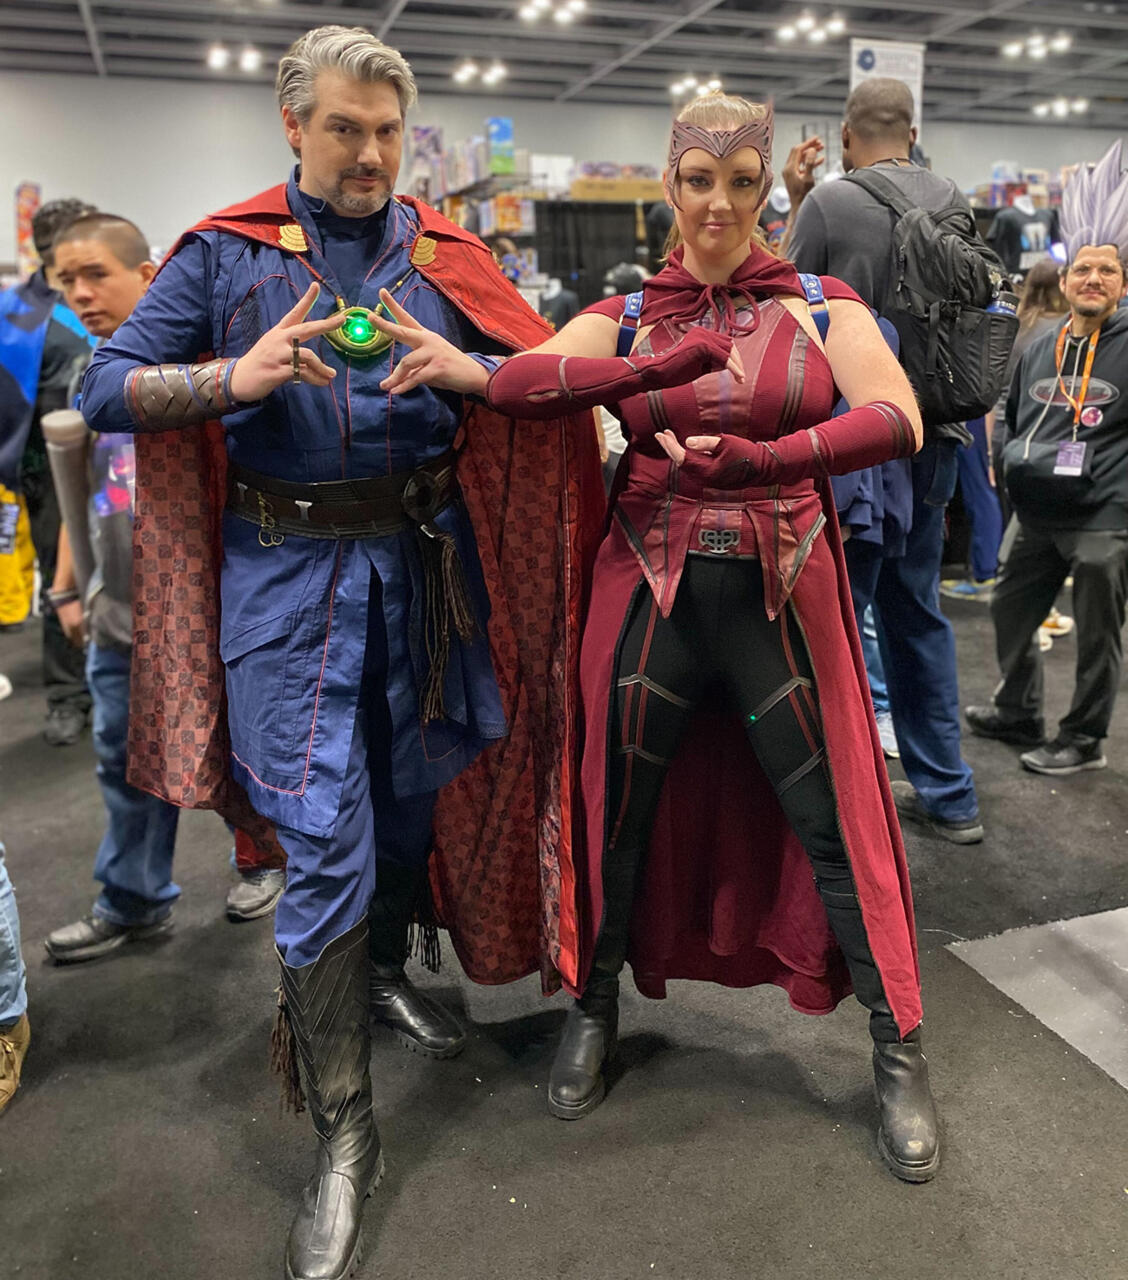 Doctor Strange and Scarlet Witch